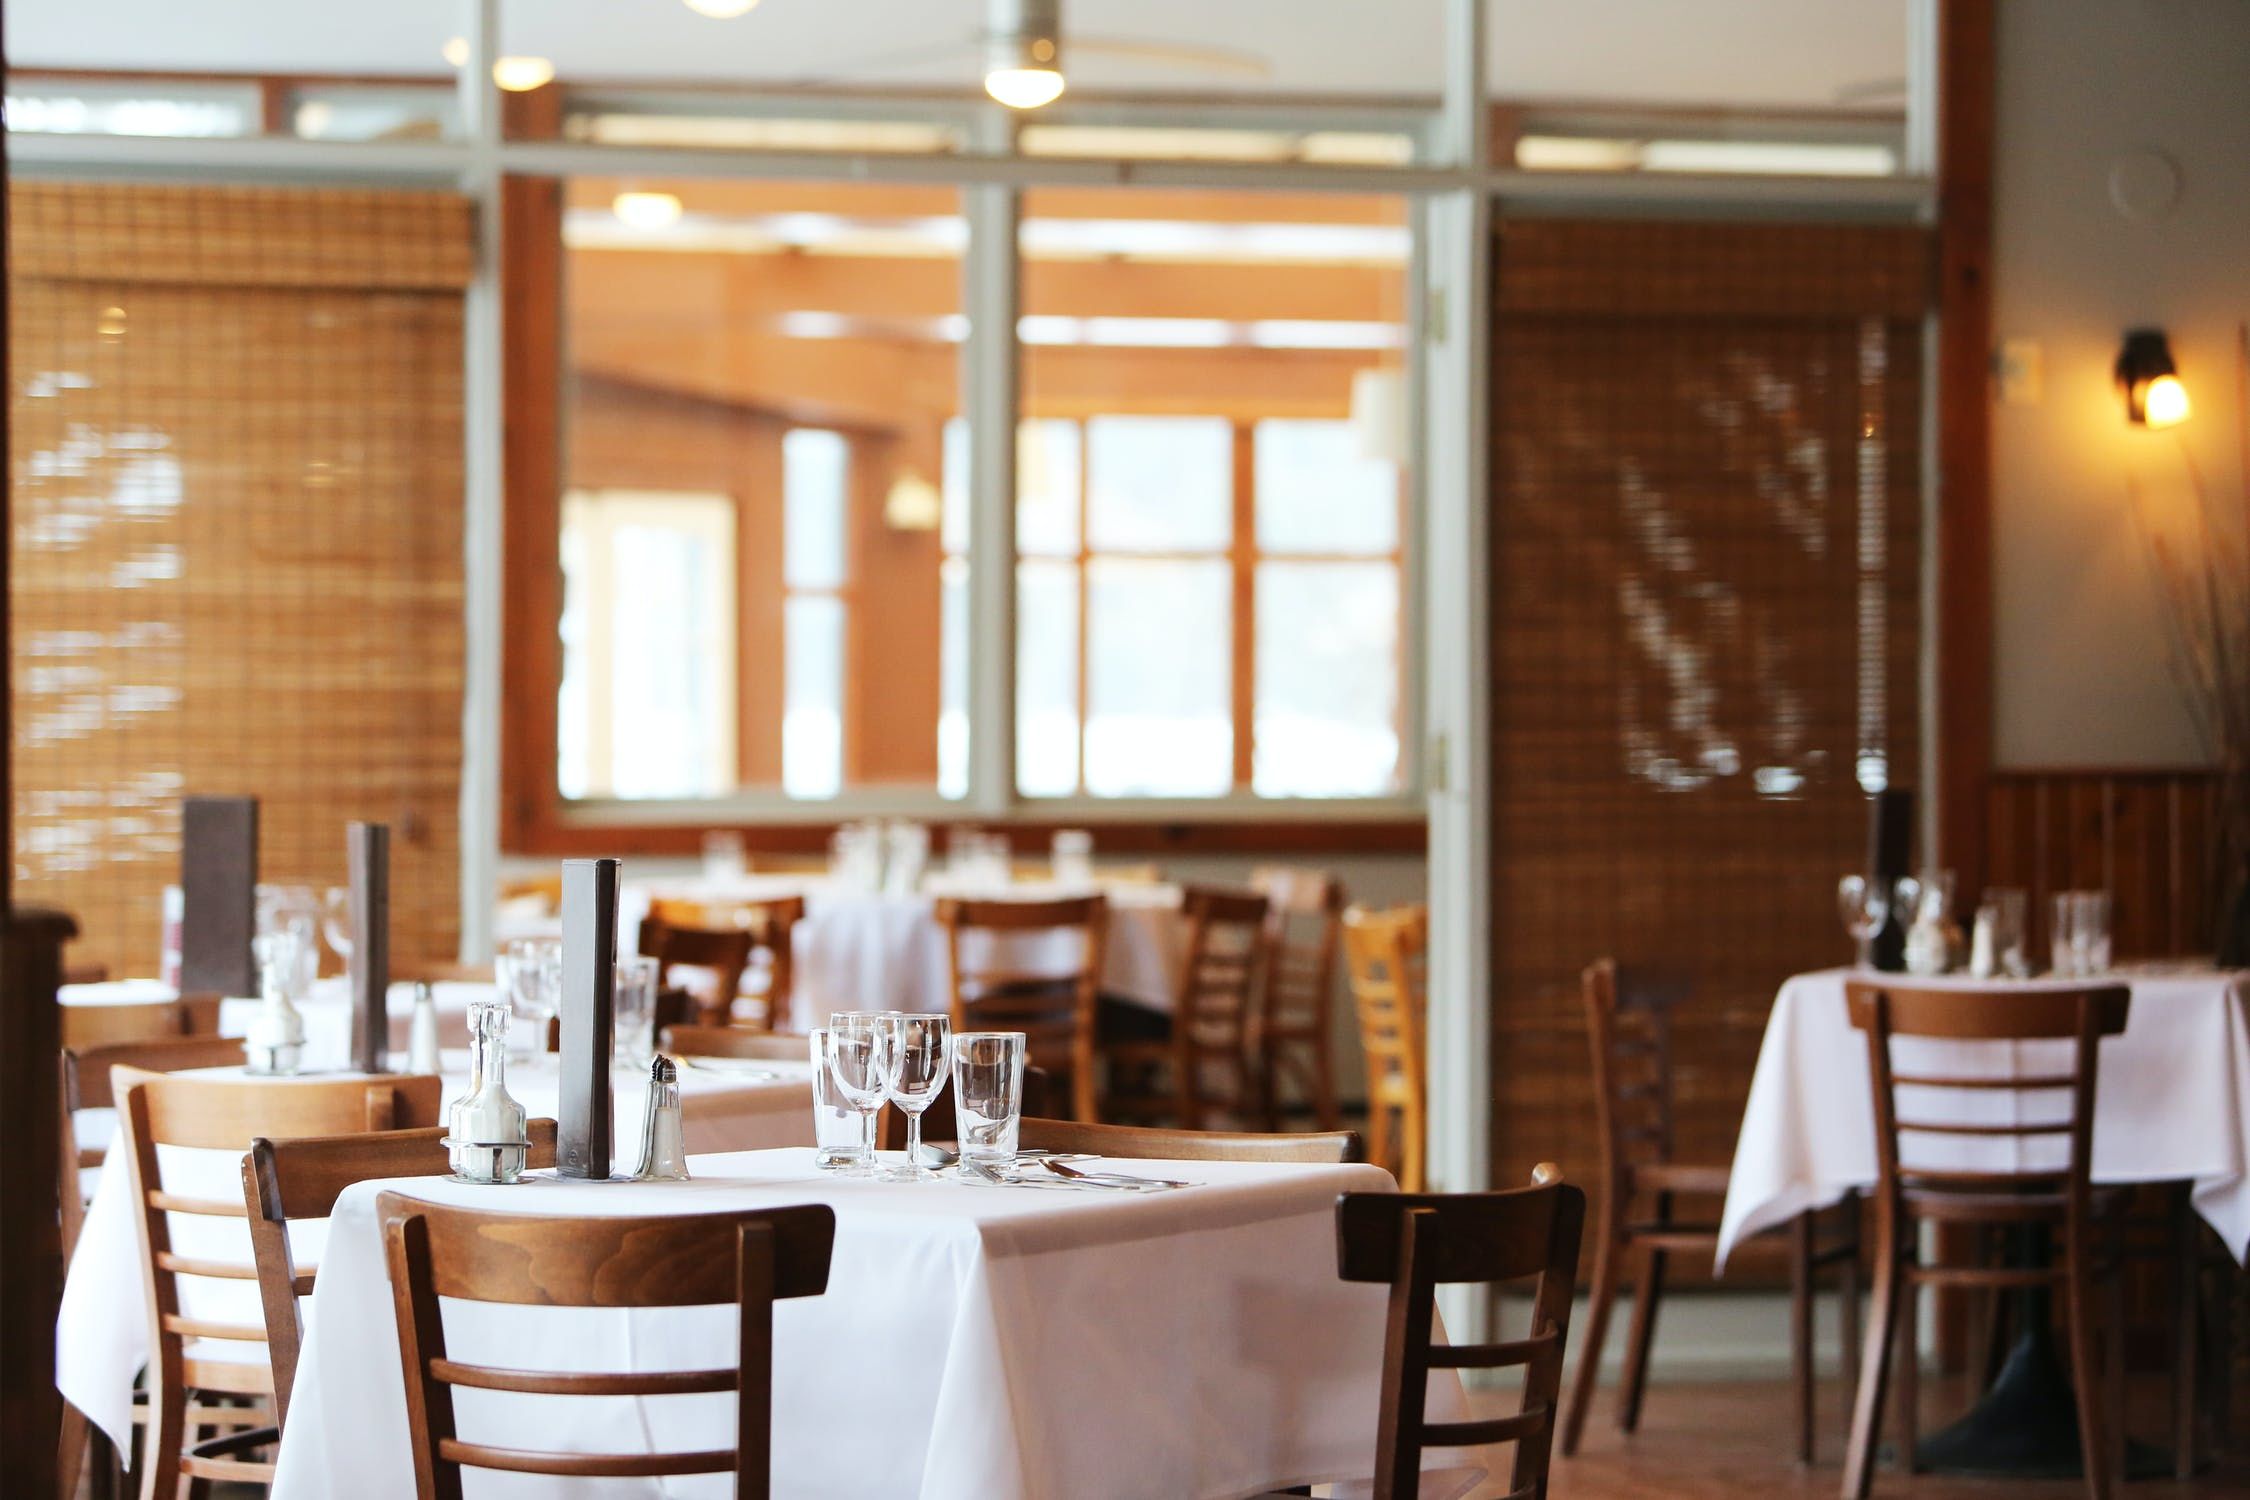 Starting a Website for Your Restaurant: 4 Essential Tips